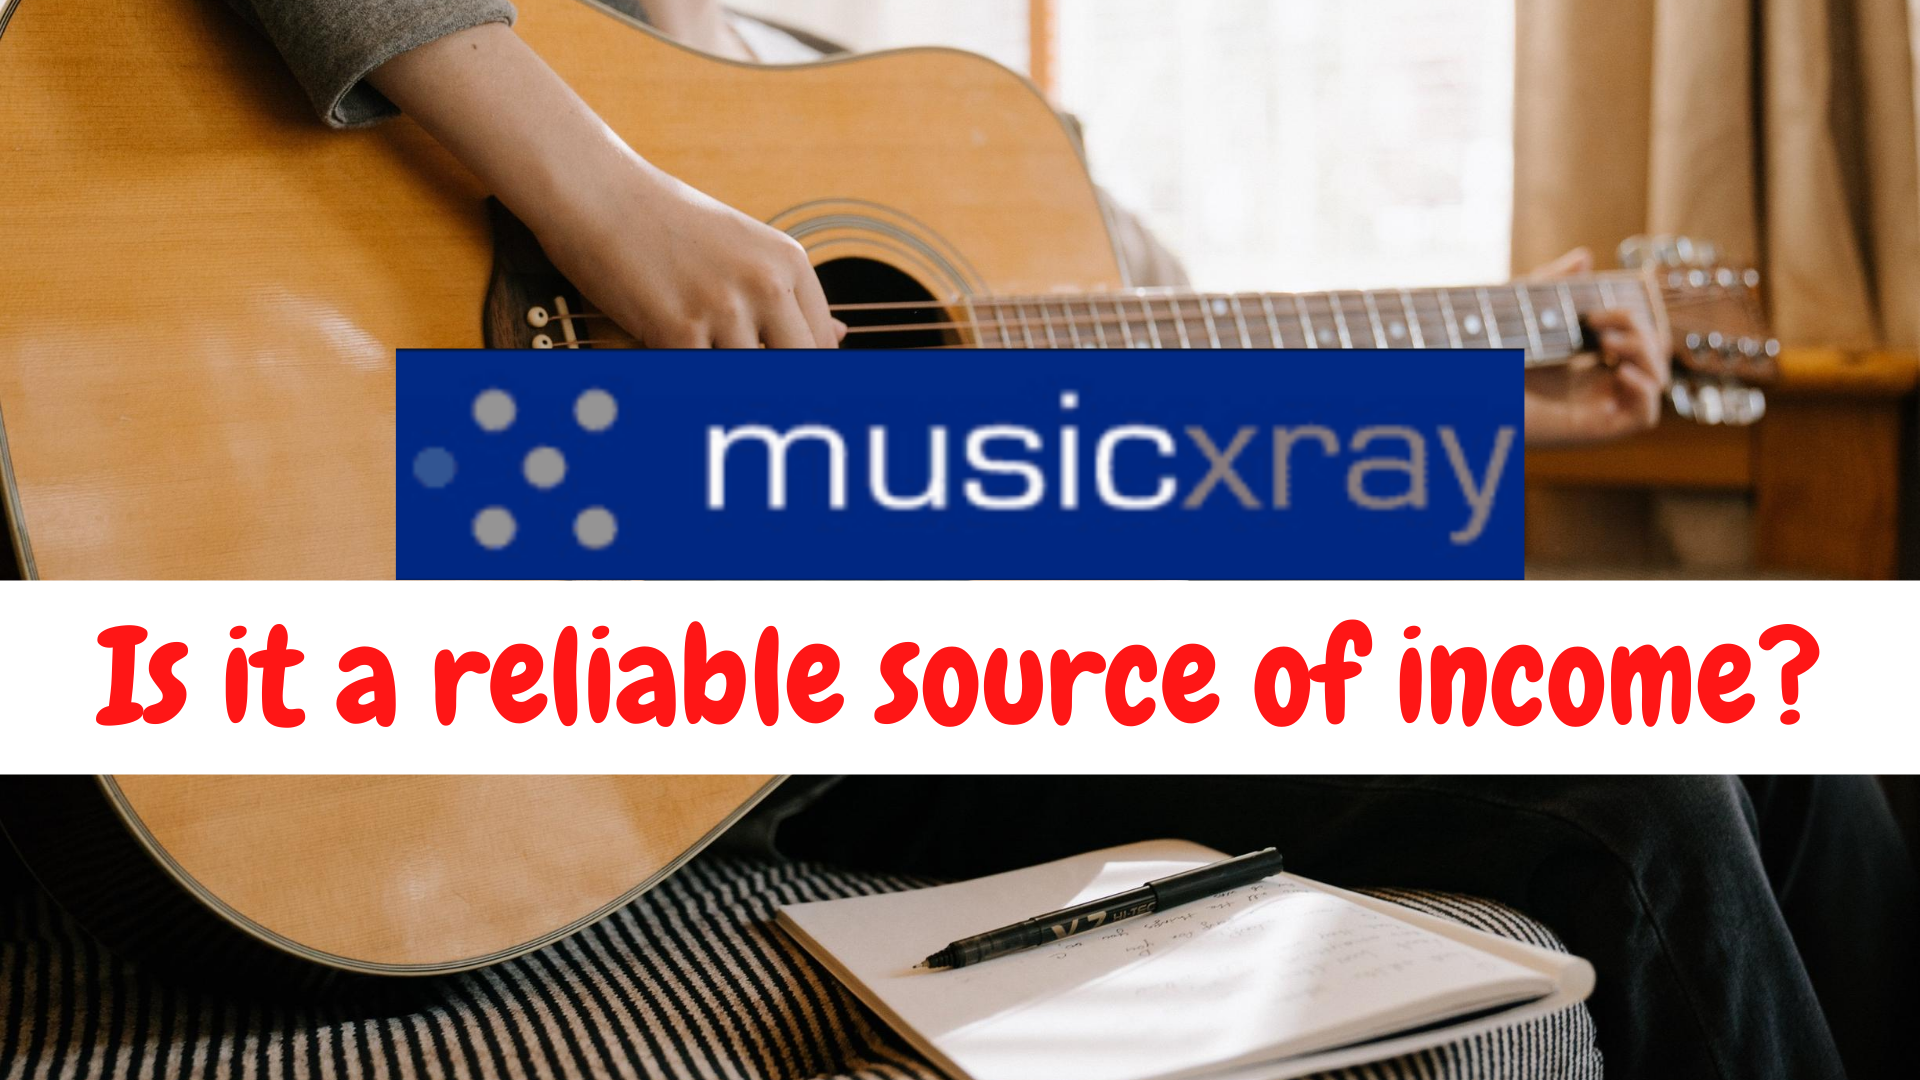 Music xray Review